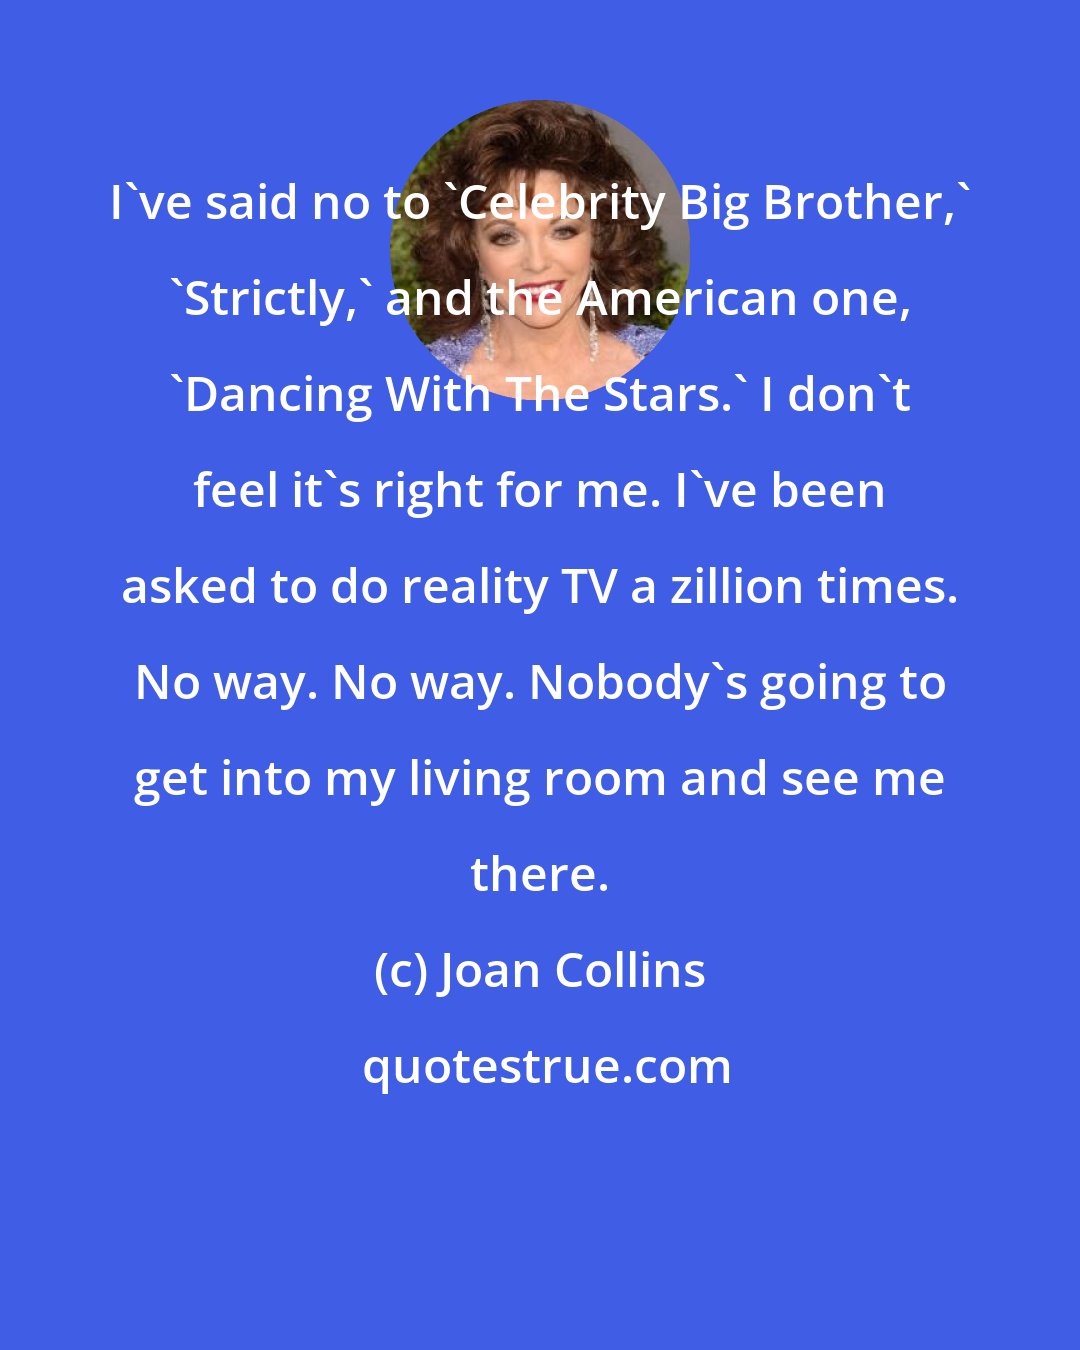 Joan Collins: I've said no to 'Celebrity Big Brother,' 'Strictly,' and the American one, 'Dancing With The Stars.' I don't feel it's right for me. I've been asked to do reality TV a zillion times. No way. No way. Nobody's going to get into my living room and see me there.